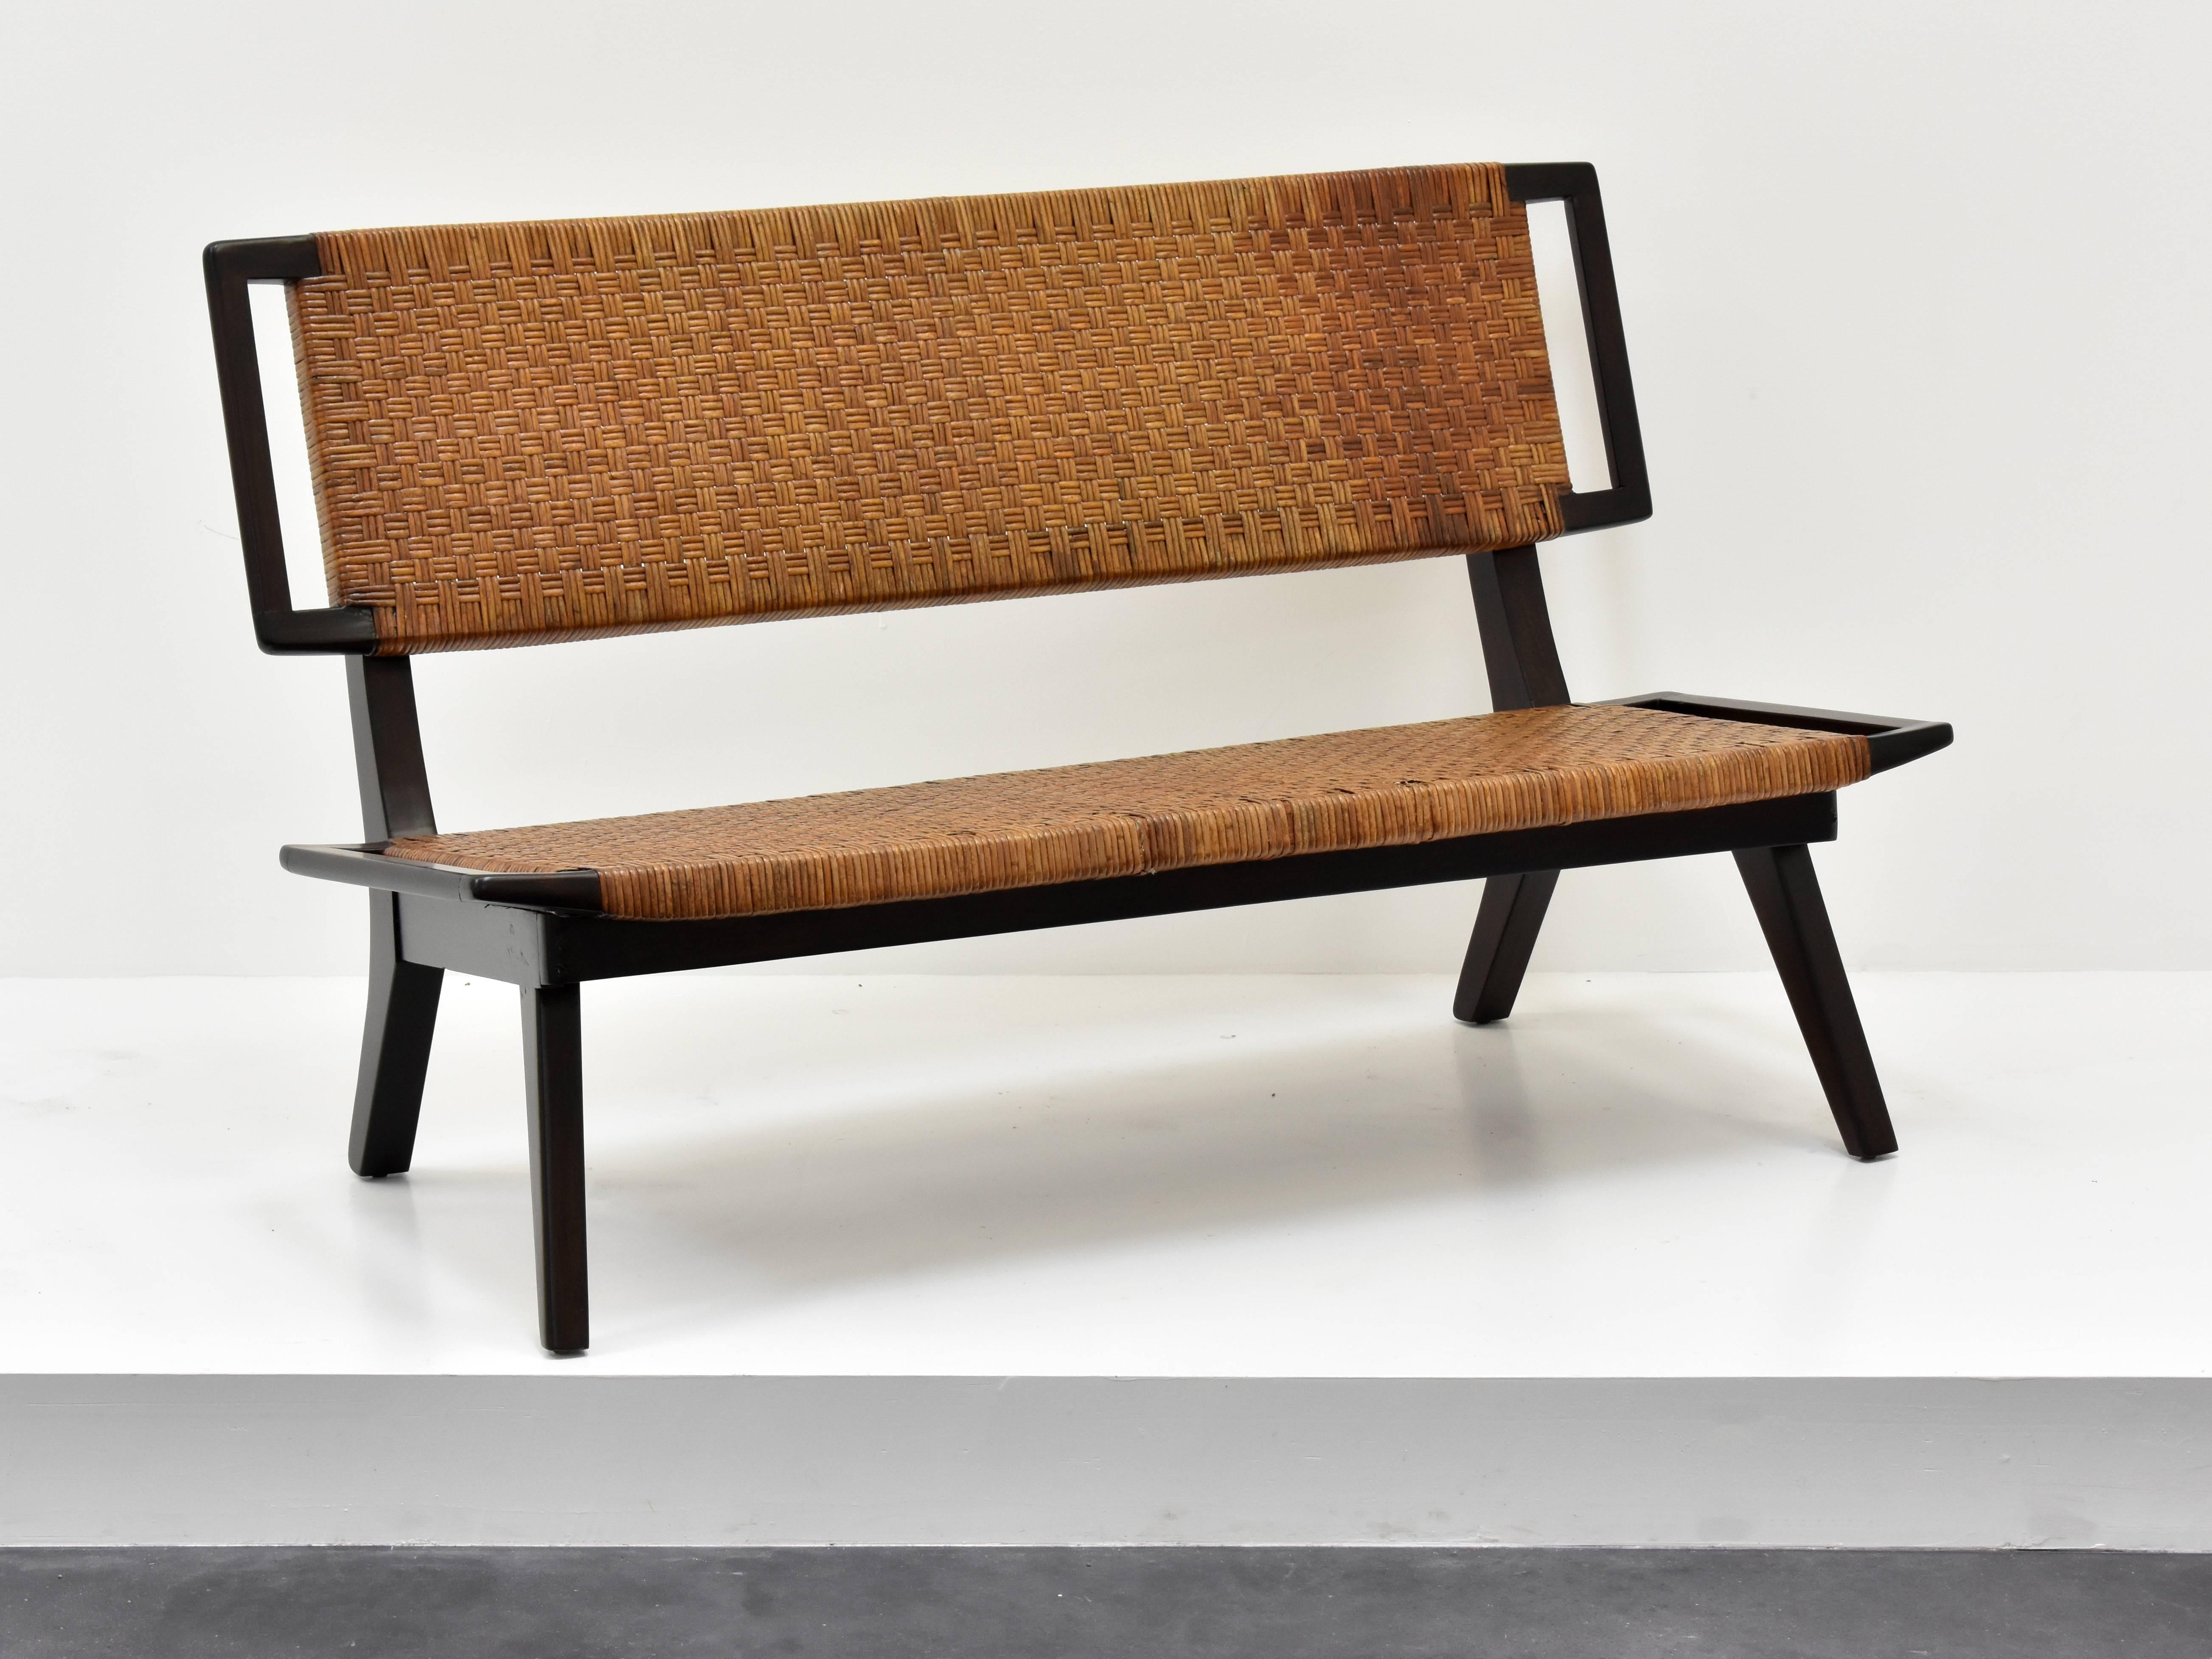 A settee, bench or small sofa in the style of Paul László for Glenn of California. Dark stained mahogany and original woven rattan.

Paul László is considered among the most important California-based interior designer/architects of all time. At the